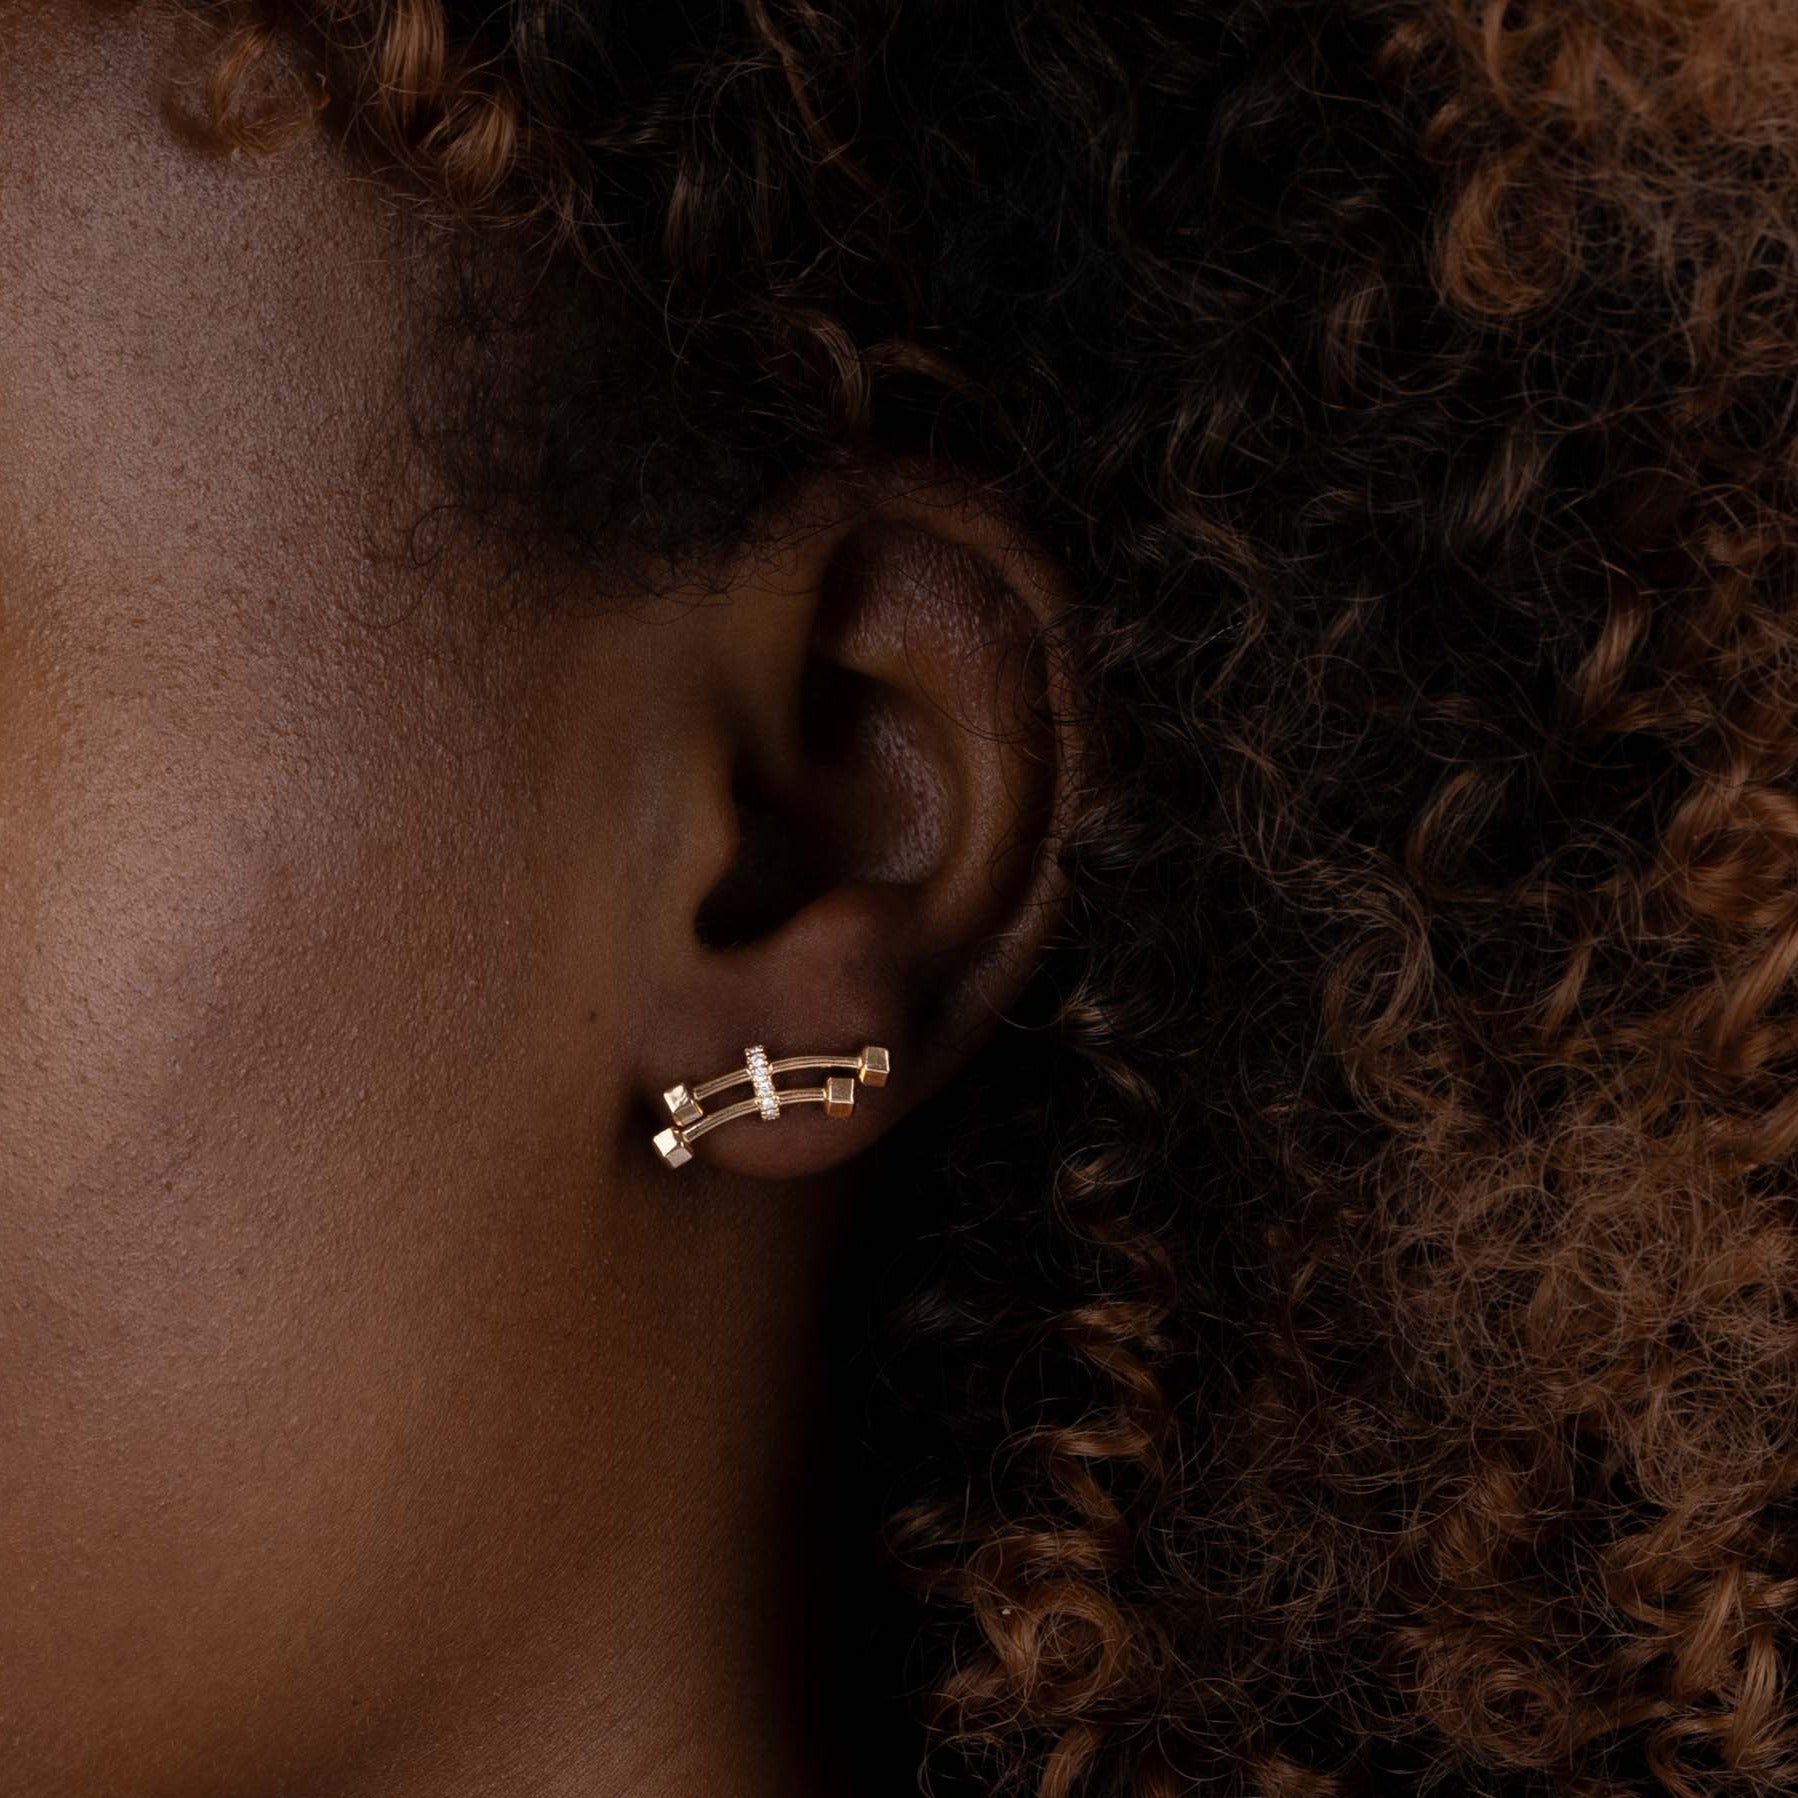 Yellow Gold Earrings with two barbells connected by Diamond encrusted bar, Small - Model shot